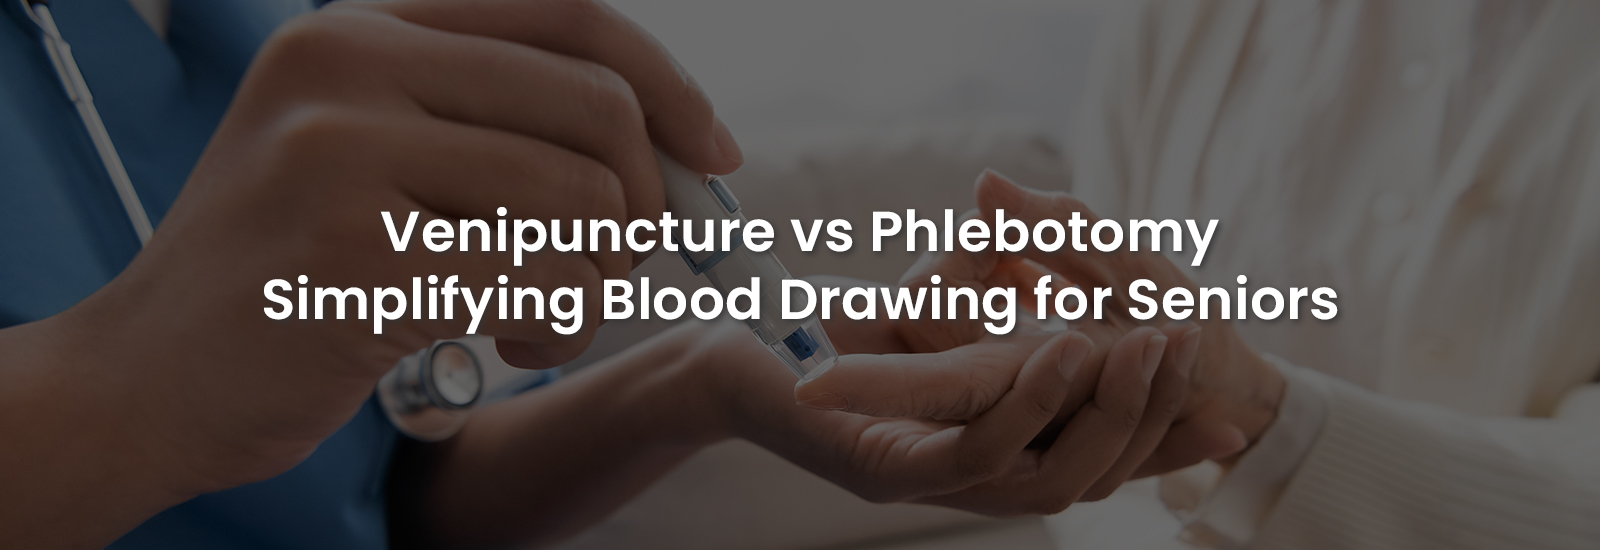 Venipuncture vs Phlebotomy Simplifying Blood Drawing for Seniors | Banner Image